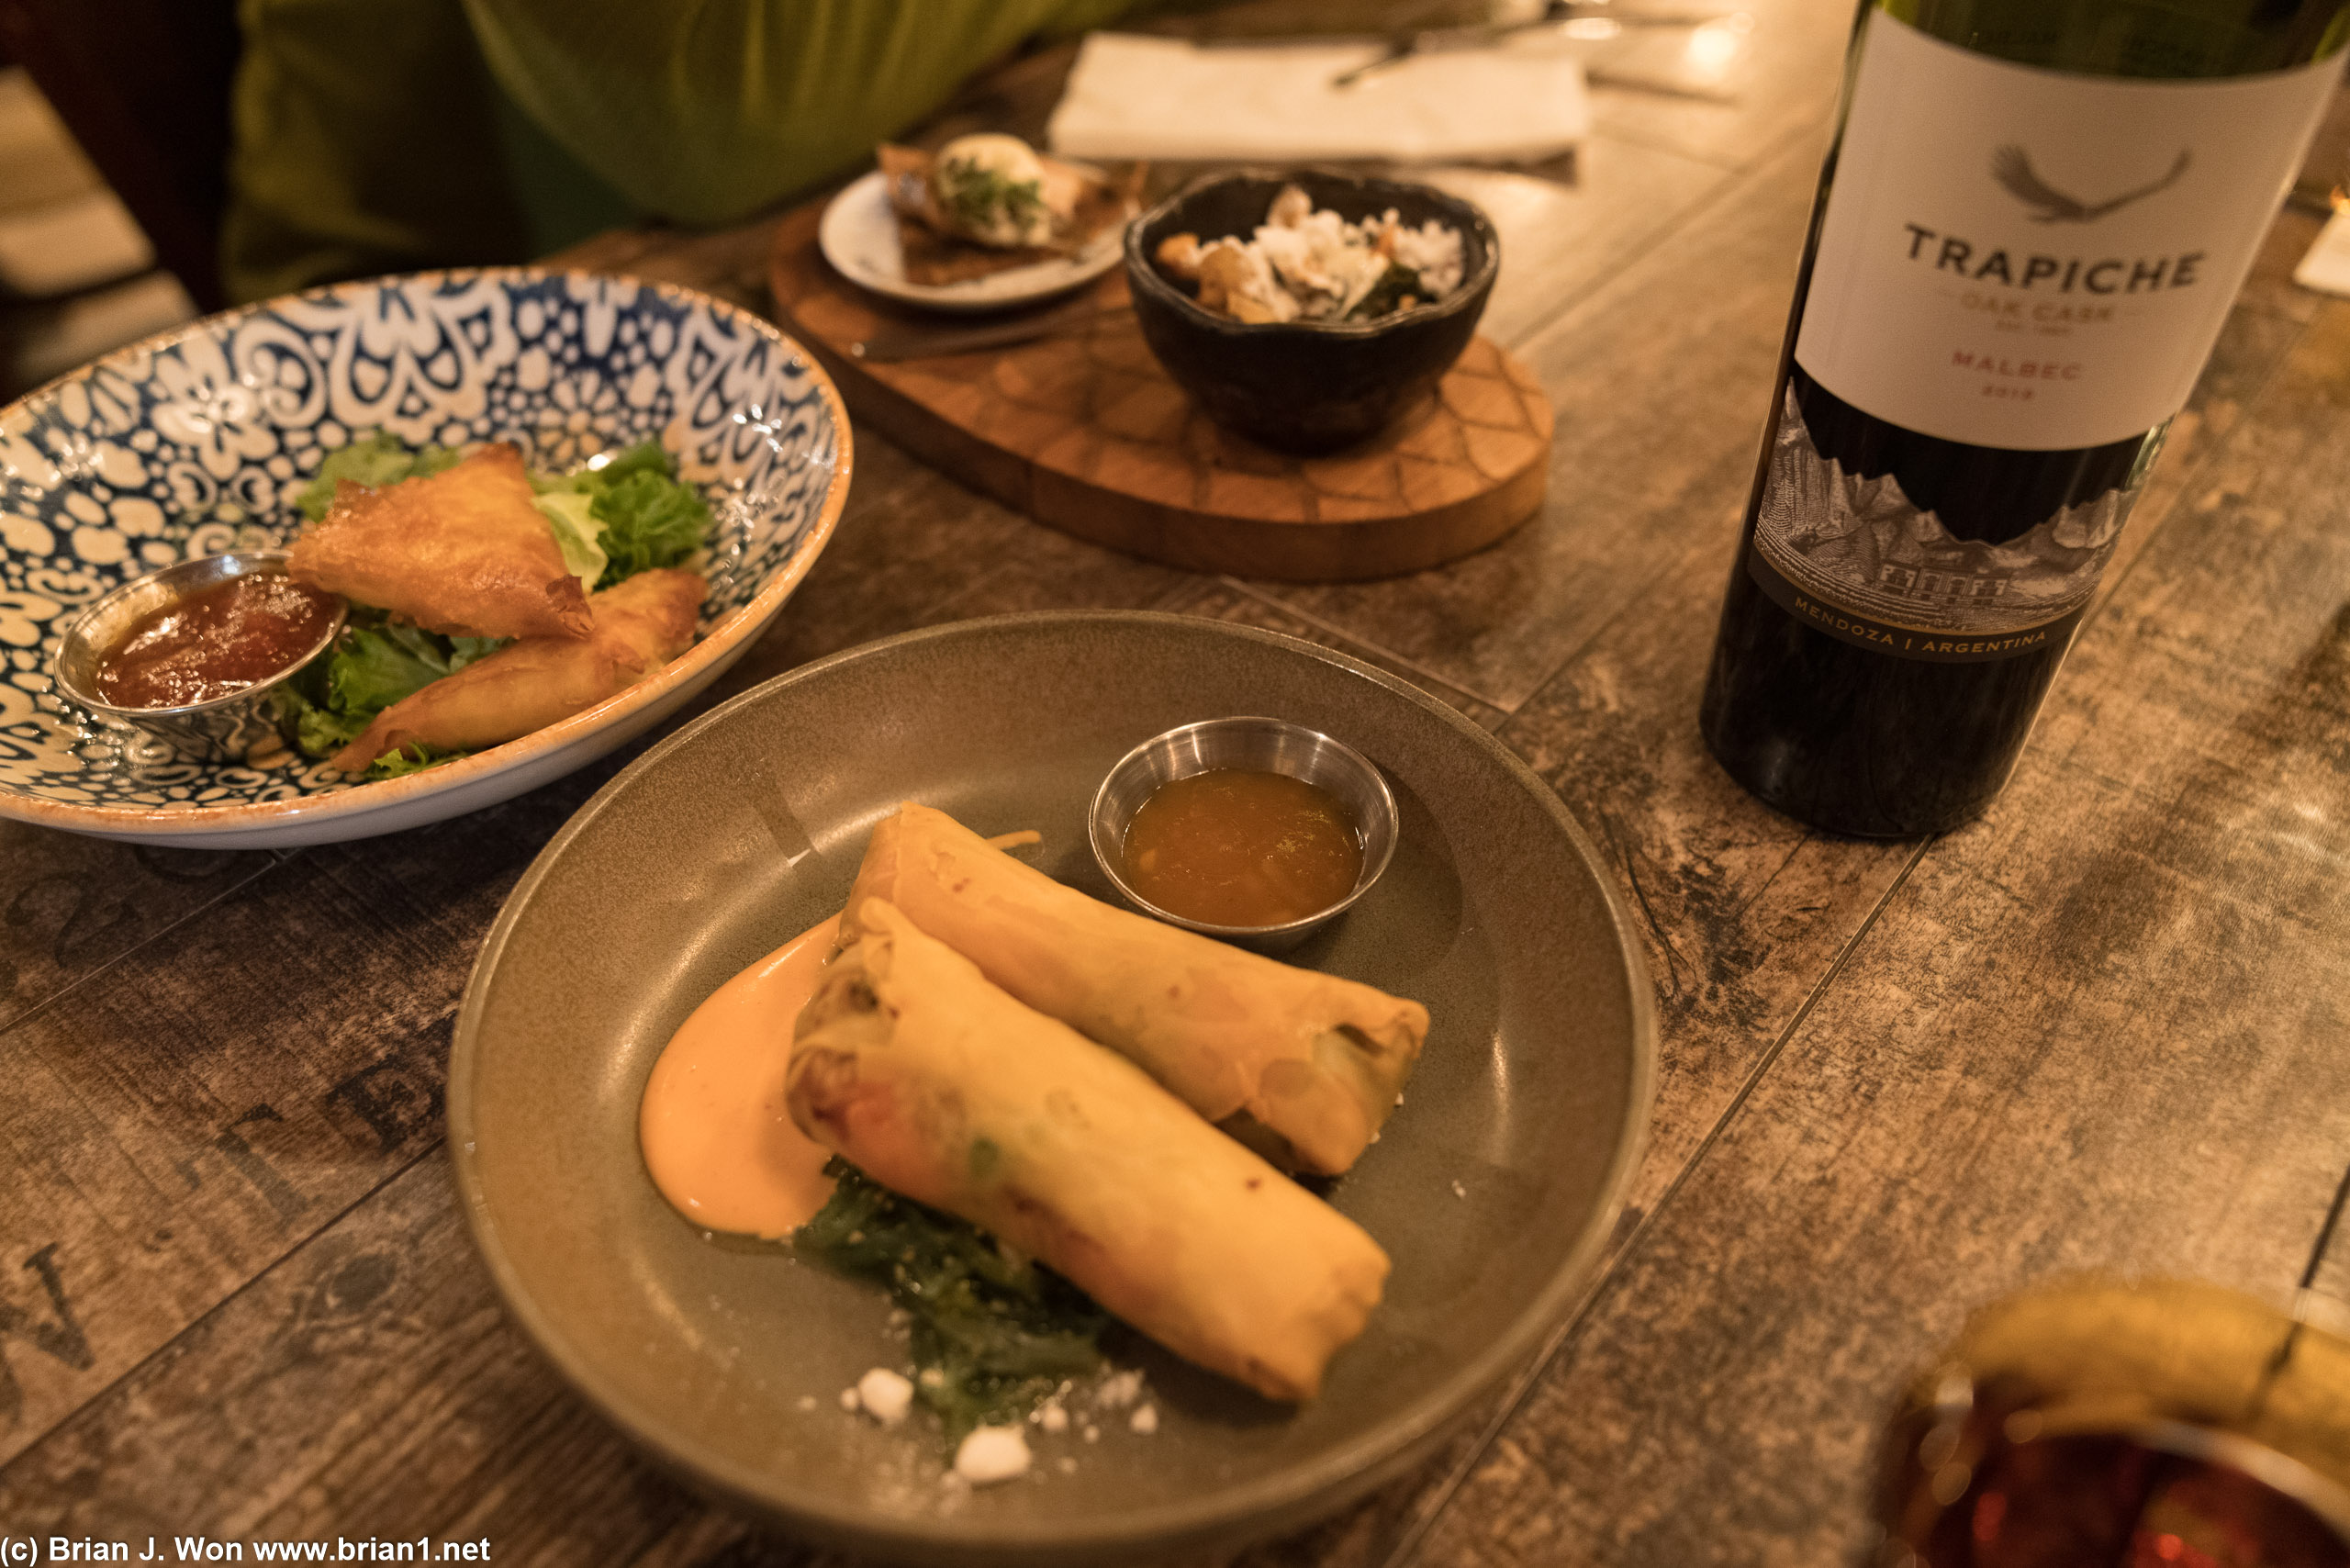 Veggie rolls and the cheese triangles were forgettable albeit well done. Wine was nice.